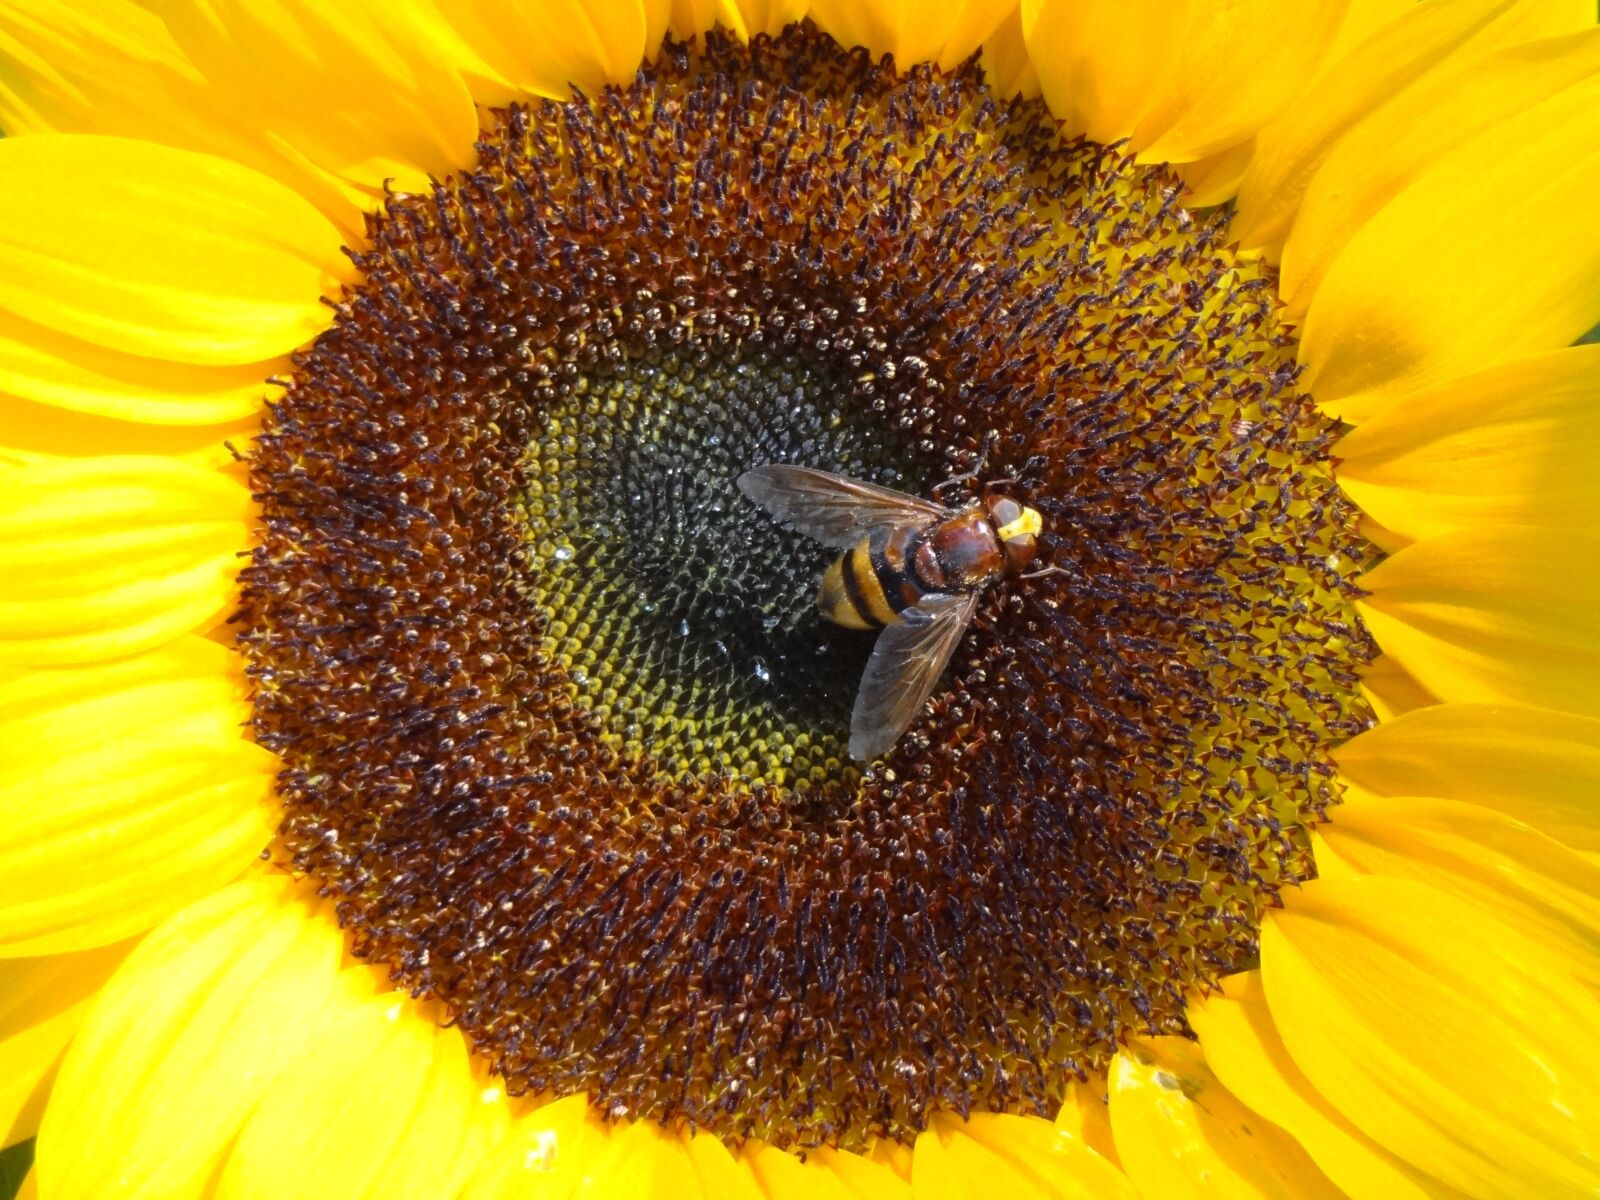 Sony Cyber-shot DSC-HX9V sample photo. Sunflower with insect, flower photography